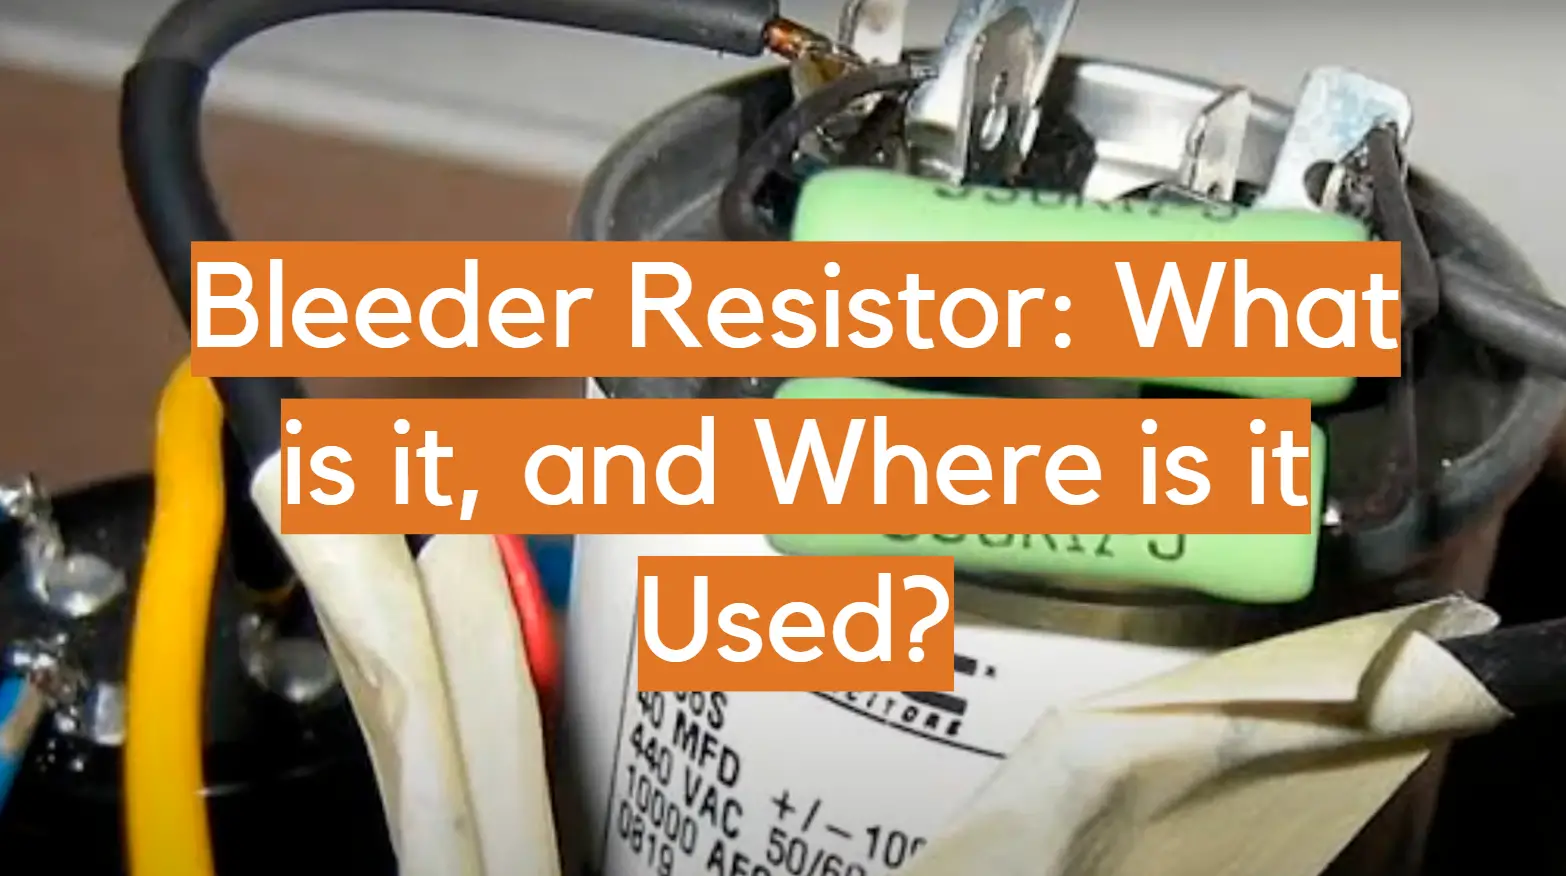 Bleeder Resistor: What is it, and Where is it Used?